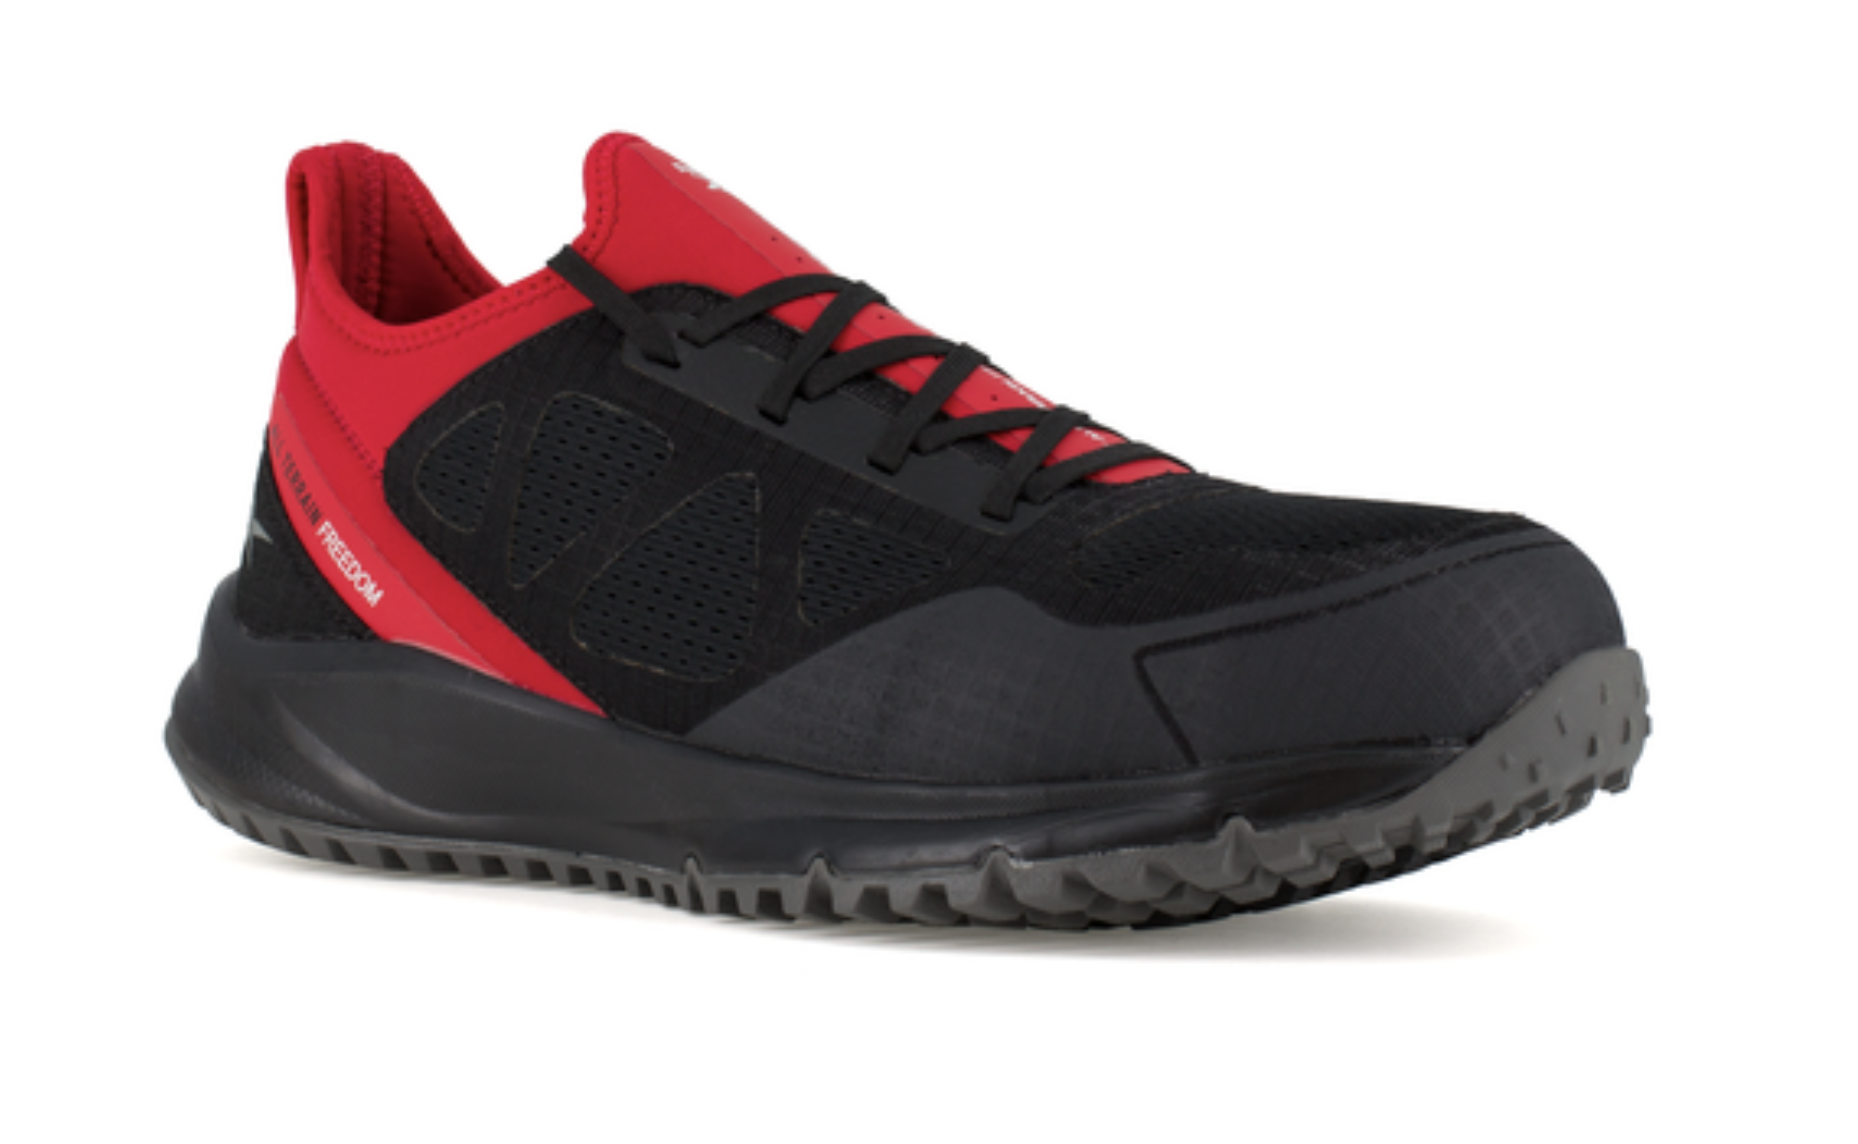 Safety in Style: Reebok's Safety Shoes are available in Canada!